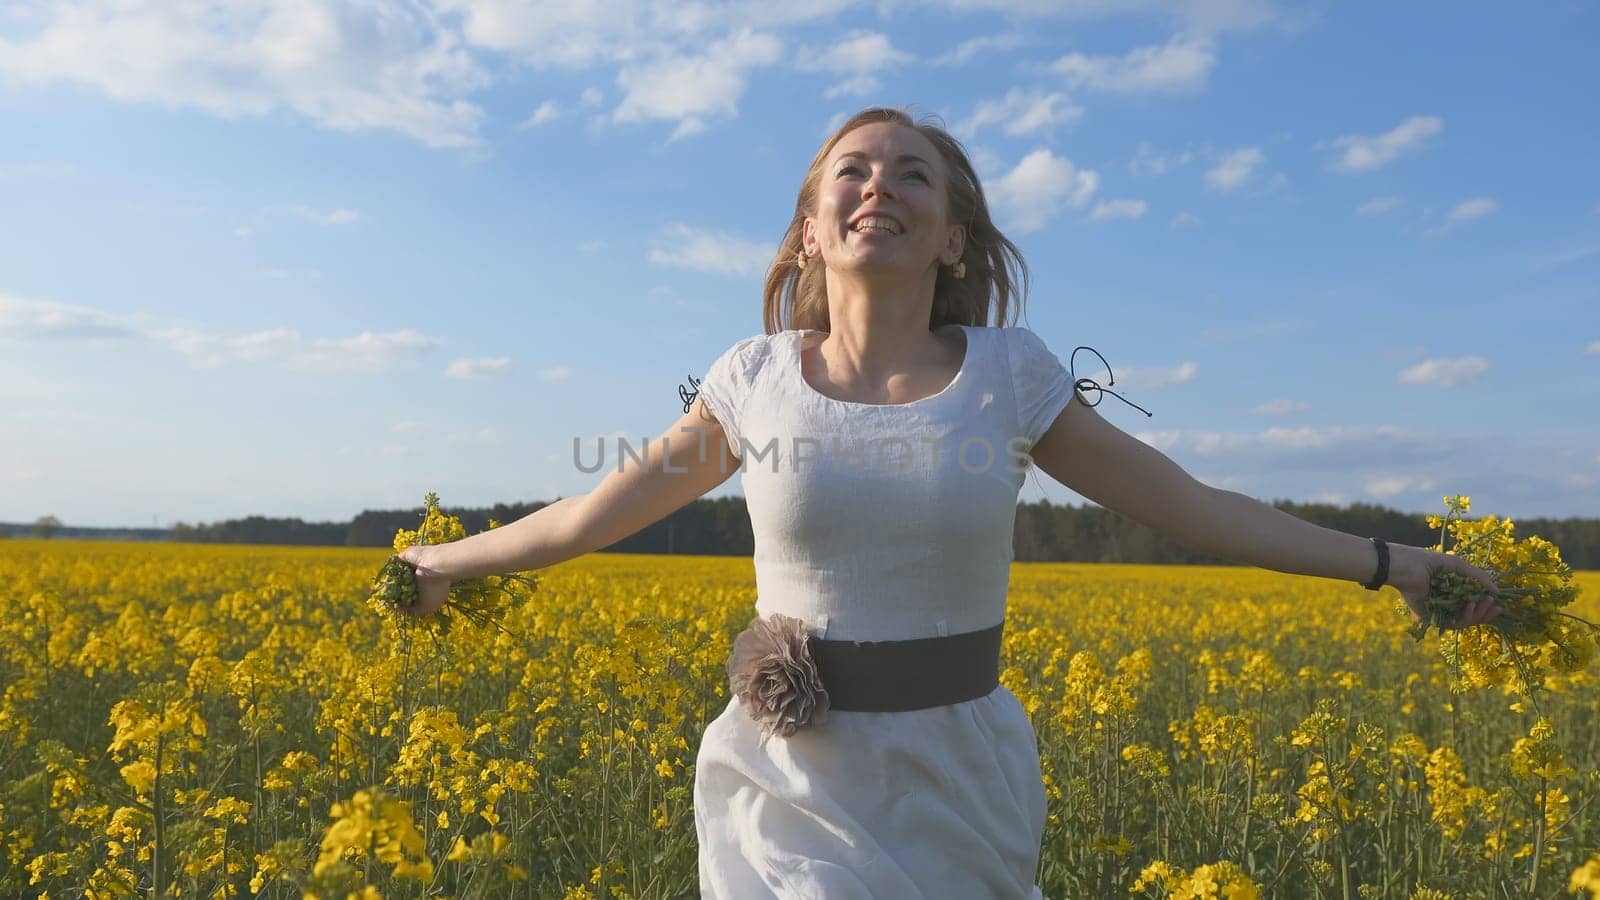 A girl in a white dress runs among a rapeseed field. by DovidPro